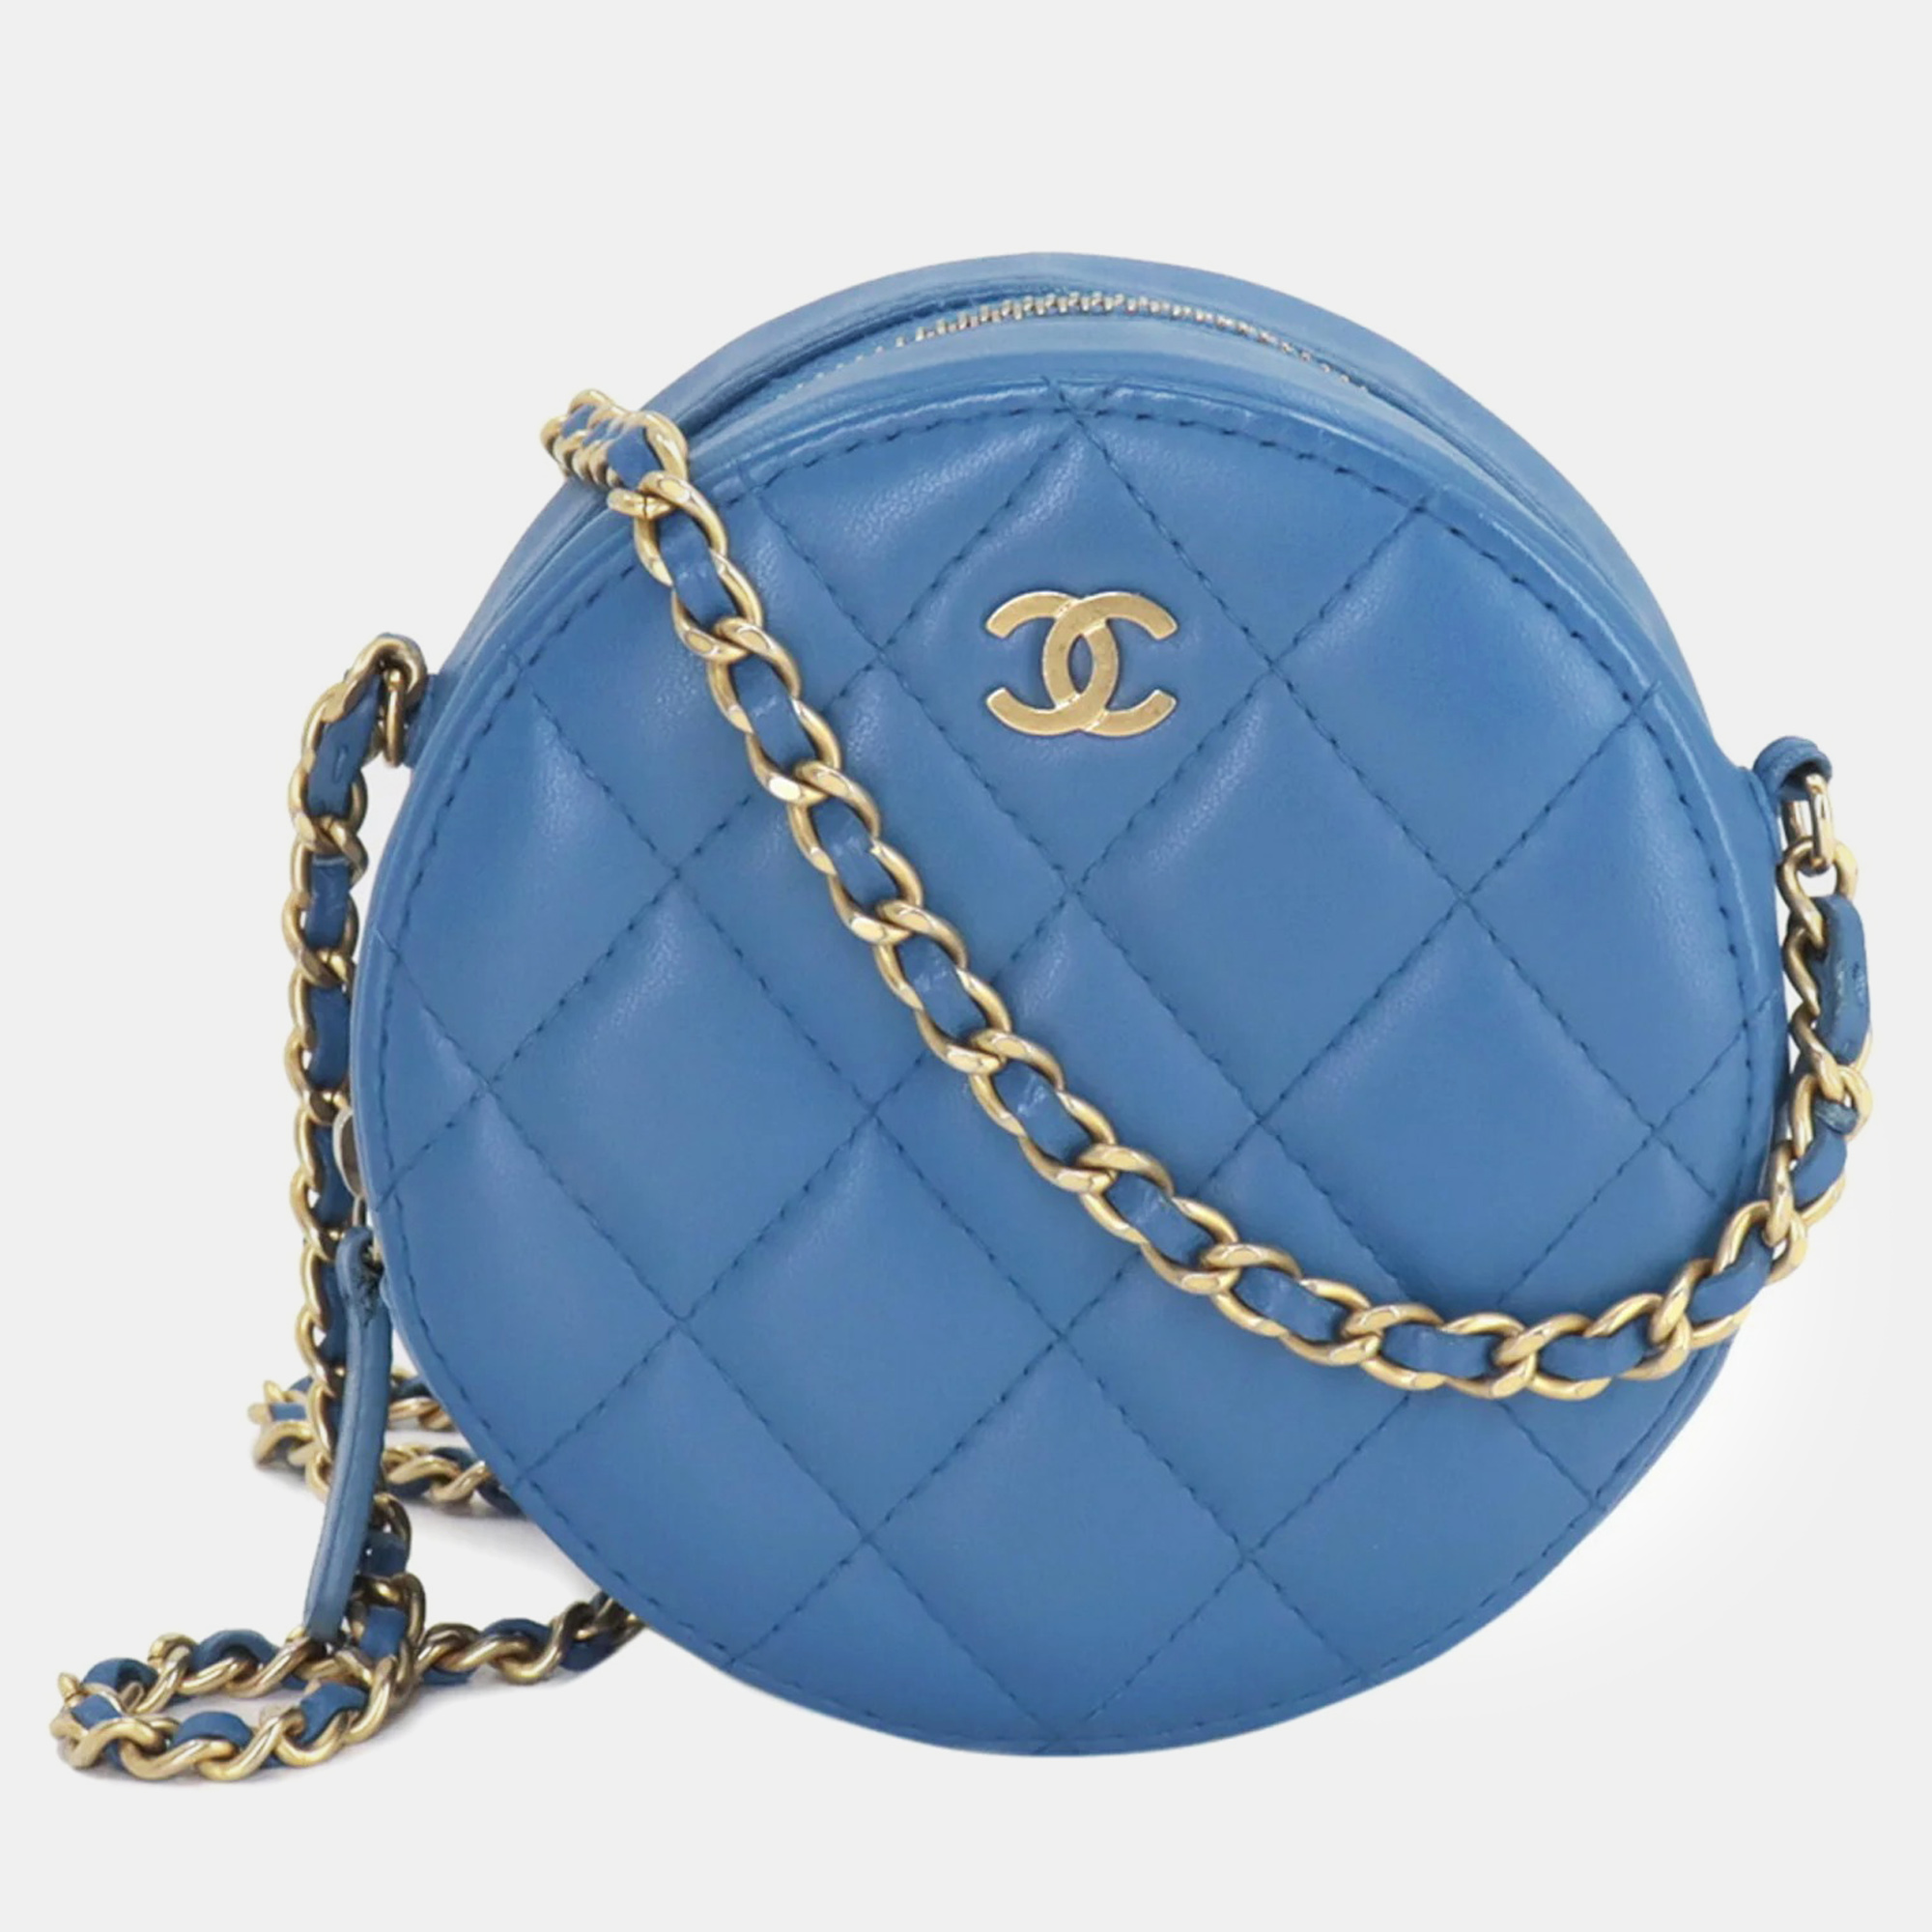 Chanel leather blue round mini classic chain shoulder bag